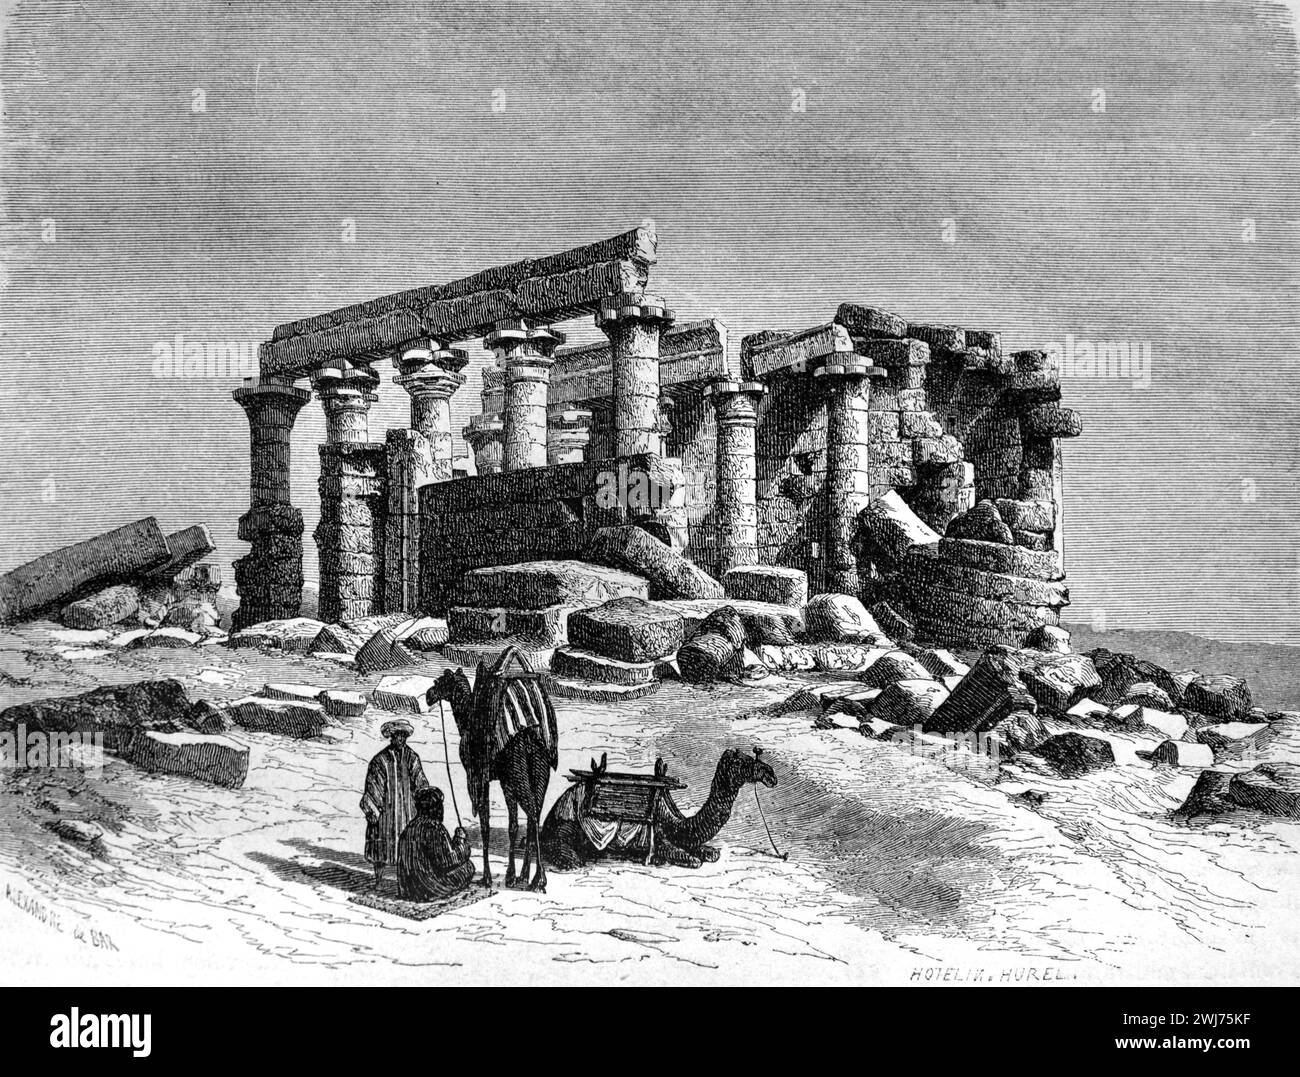 The Ruins of the Temple of Maharraqa or Temple Al-Maharraqa on it's Original Site in Lower Nubia before it's Transfer to the New Wadi es-Sabua in the 196às, Nubia, Egypt. The Ancient Egyptian Temple id Dedicated to Isis and Serapis. Vintage or Historic Engraving or Illustration 1863. Stock Photo